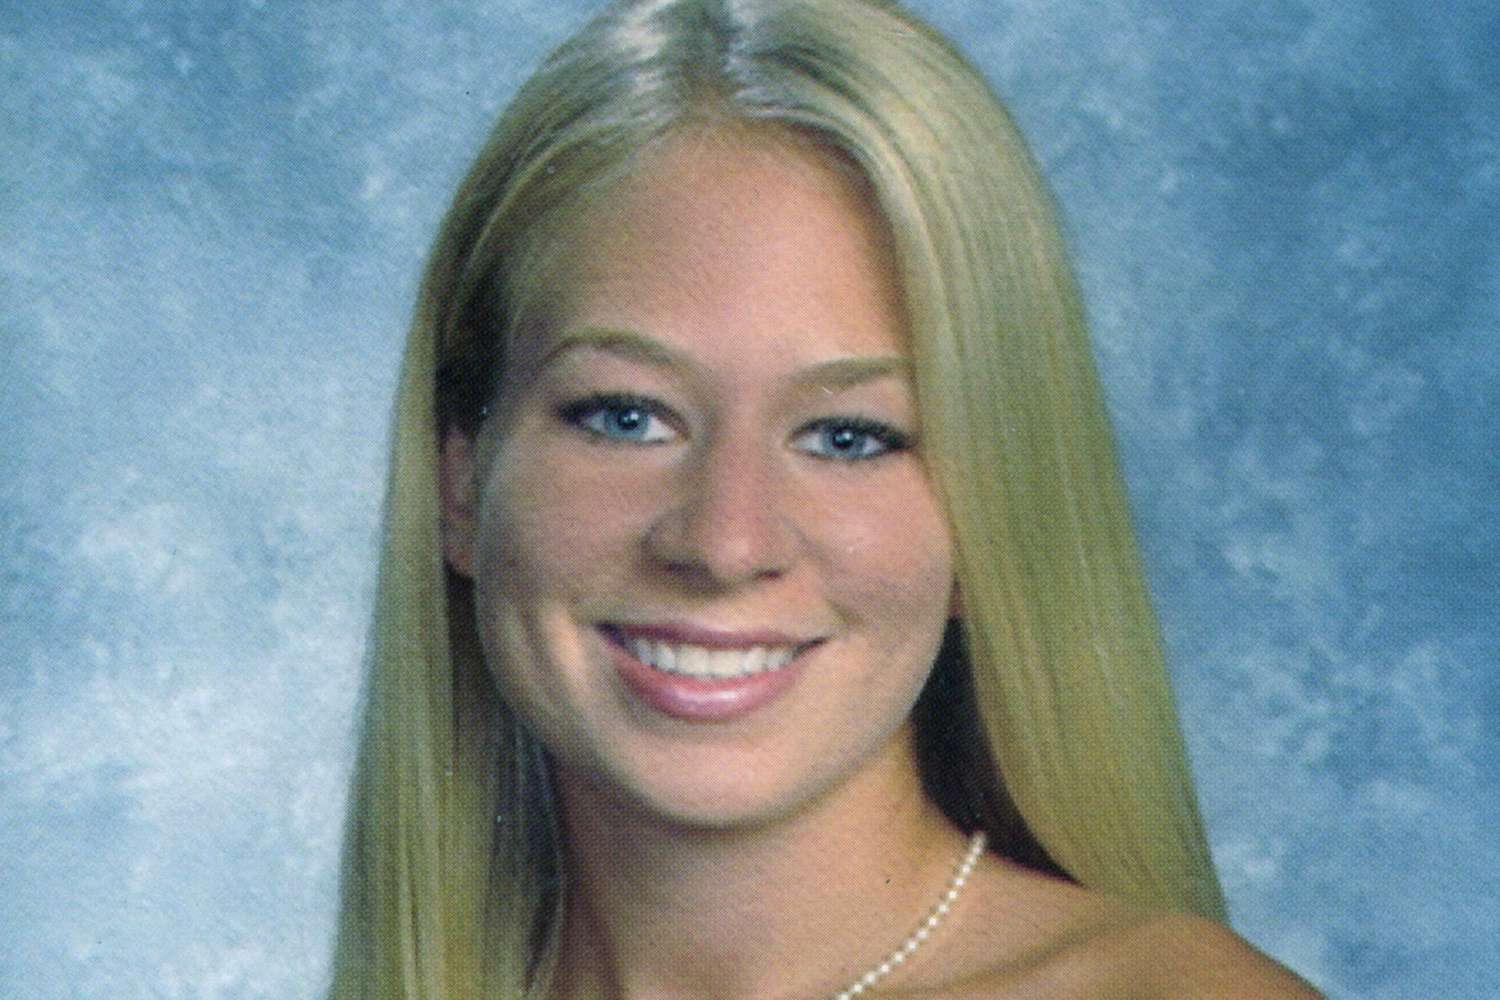 What happened to Natalee Holloway?